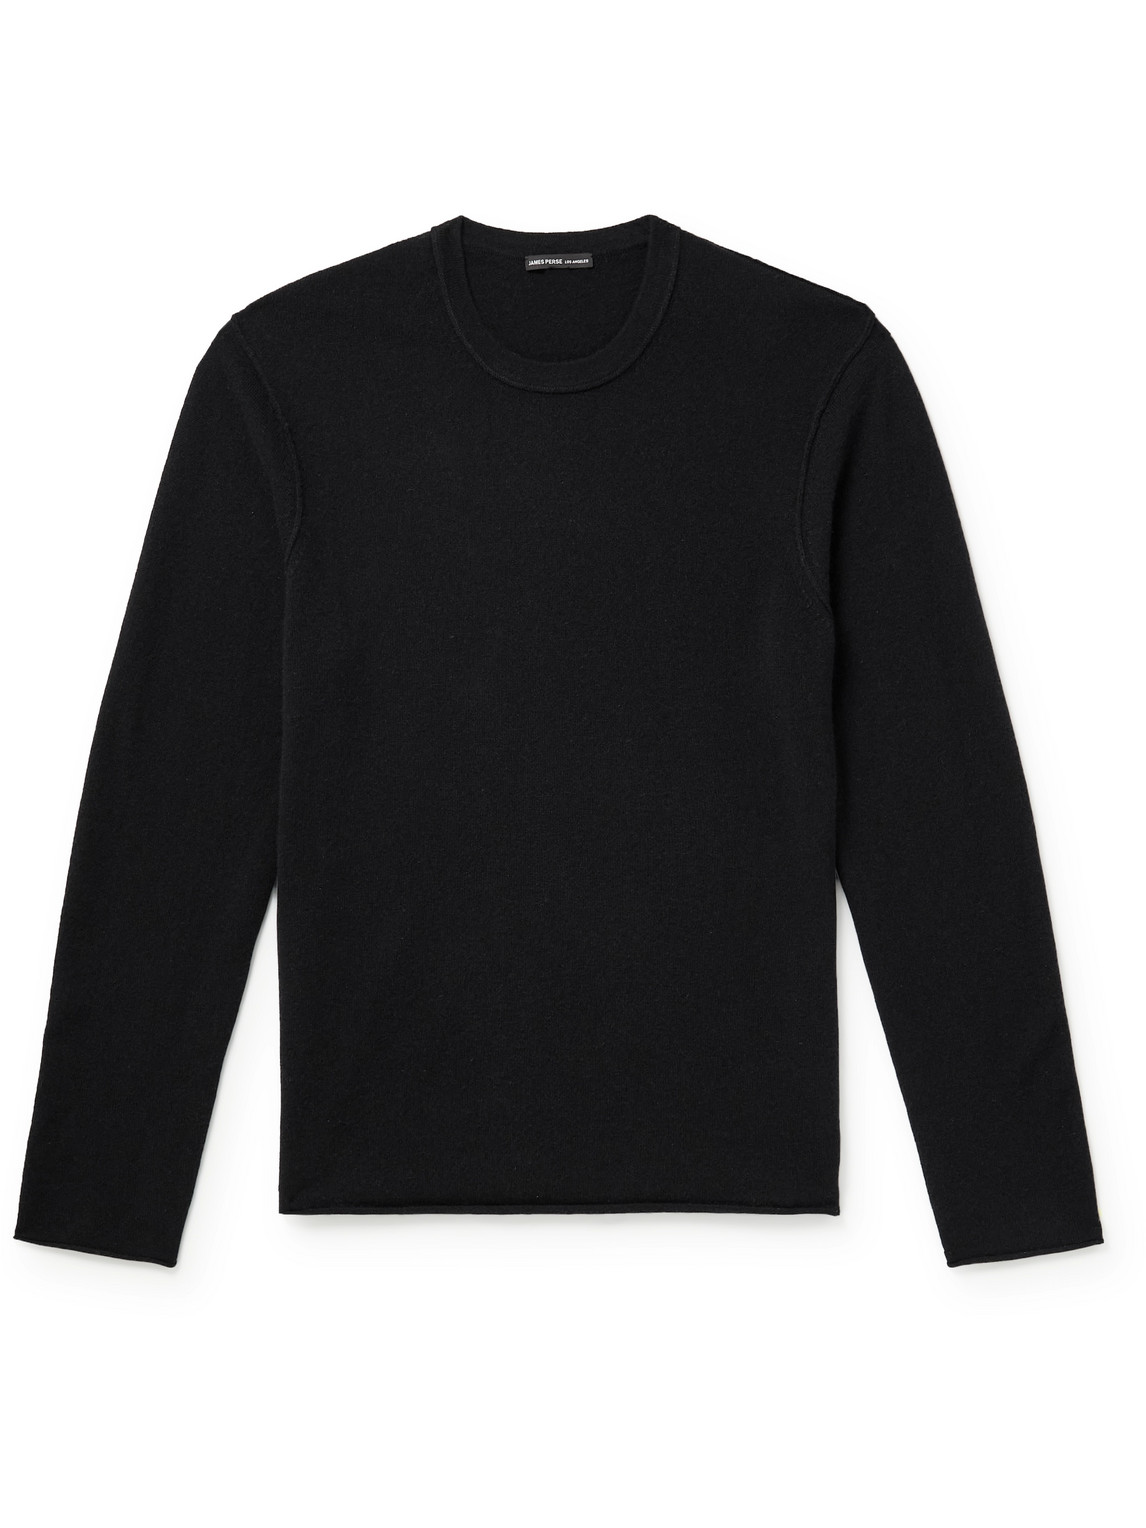 James Perse - Recycled-Cashmere Sweater - Men - Black - 1 von James Perse